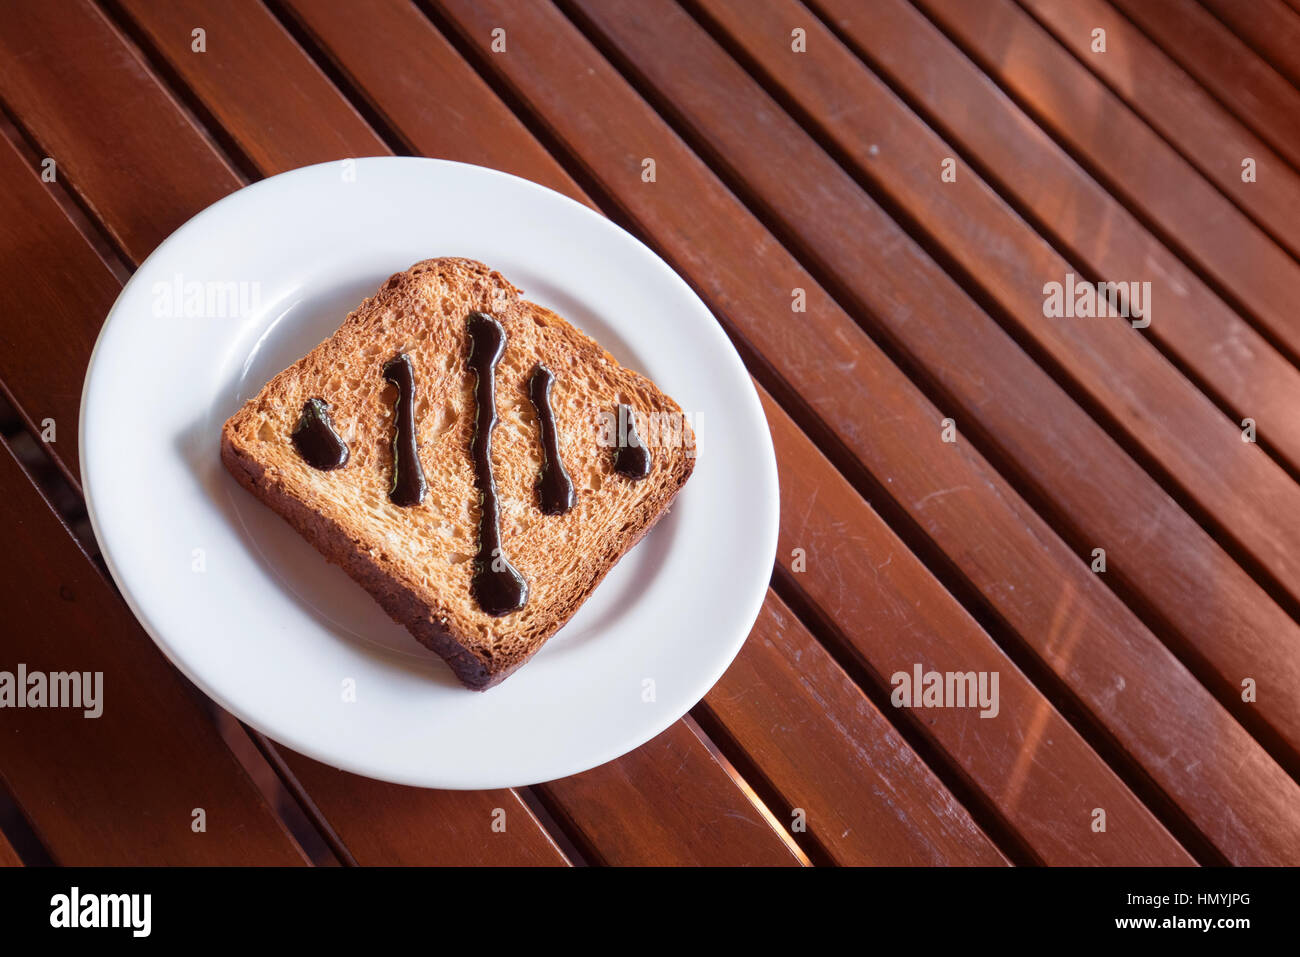 Chocolate Spread on Toast in white disk on wood table window light Stock Photo